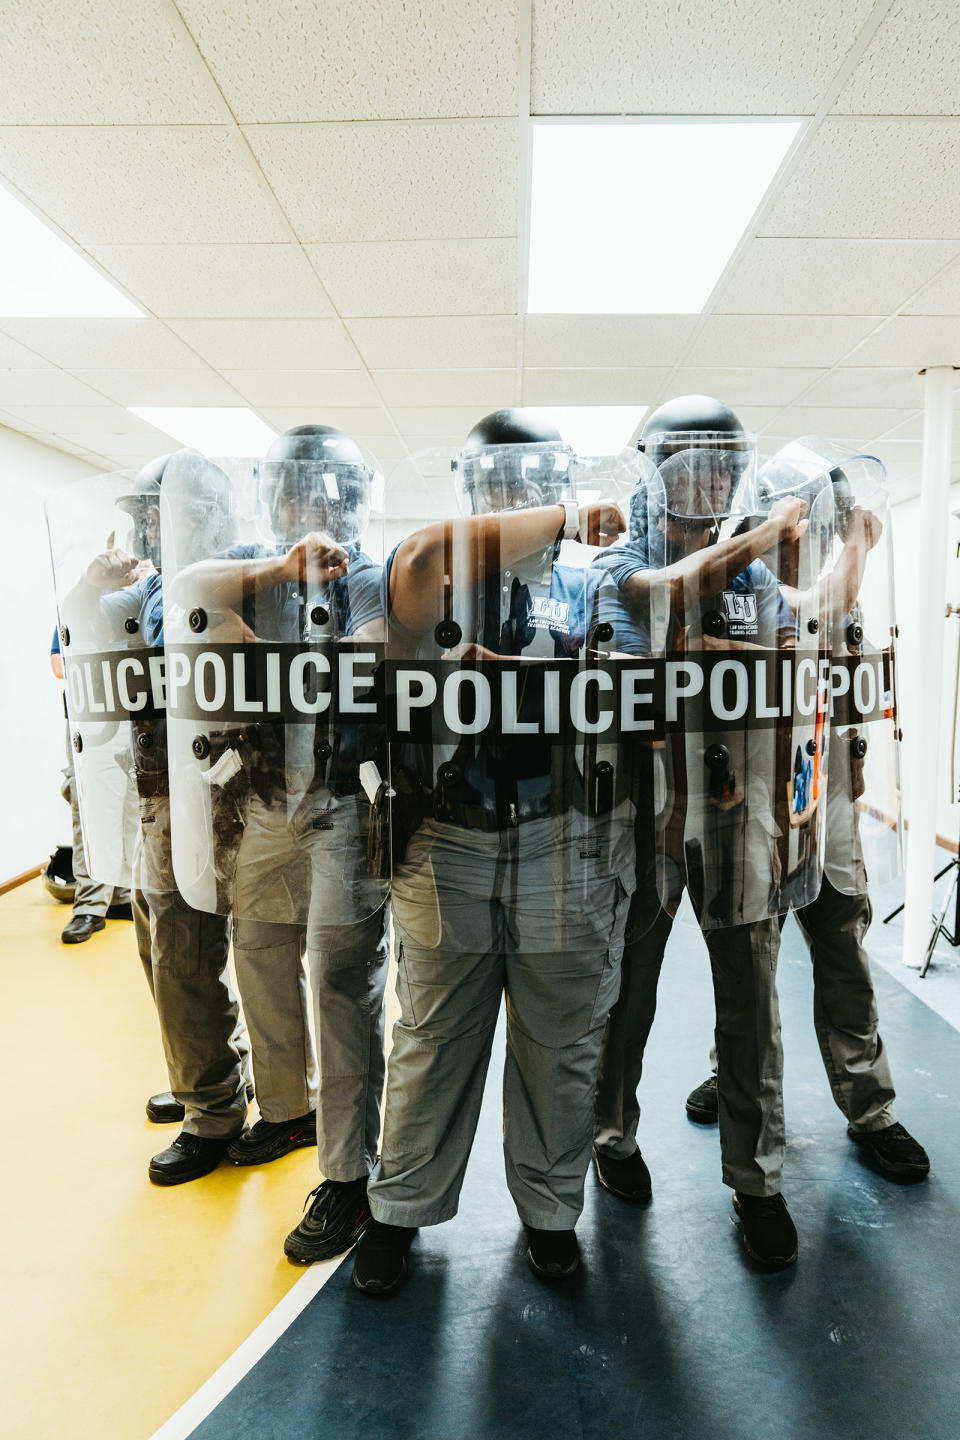 Students in tactical training at the Lincoln University Police Academy in Jefferson City, Mo., on March 12<span class="copyright">Joe Martinez for TIME</span>